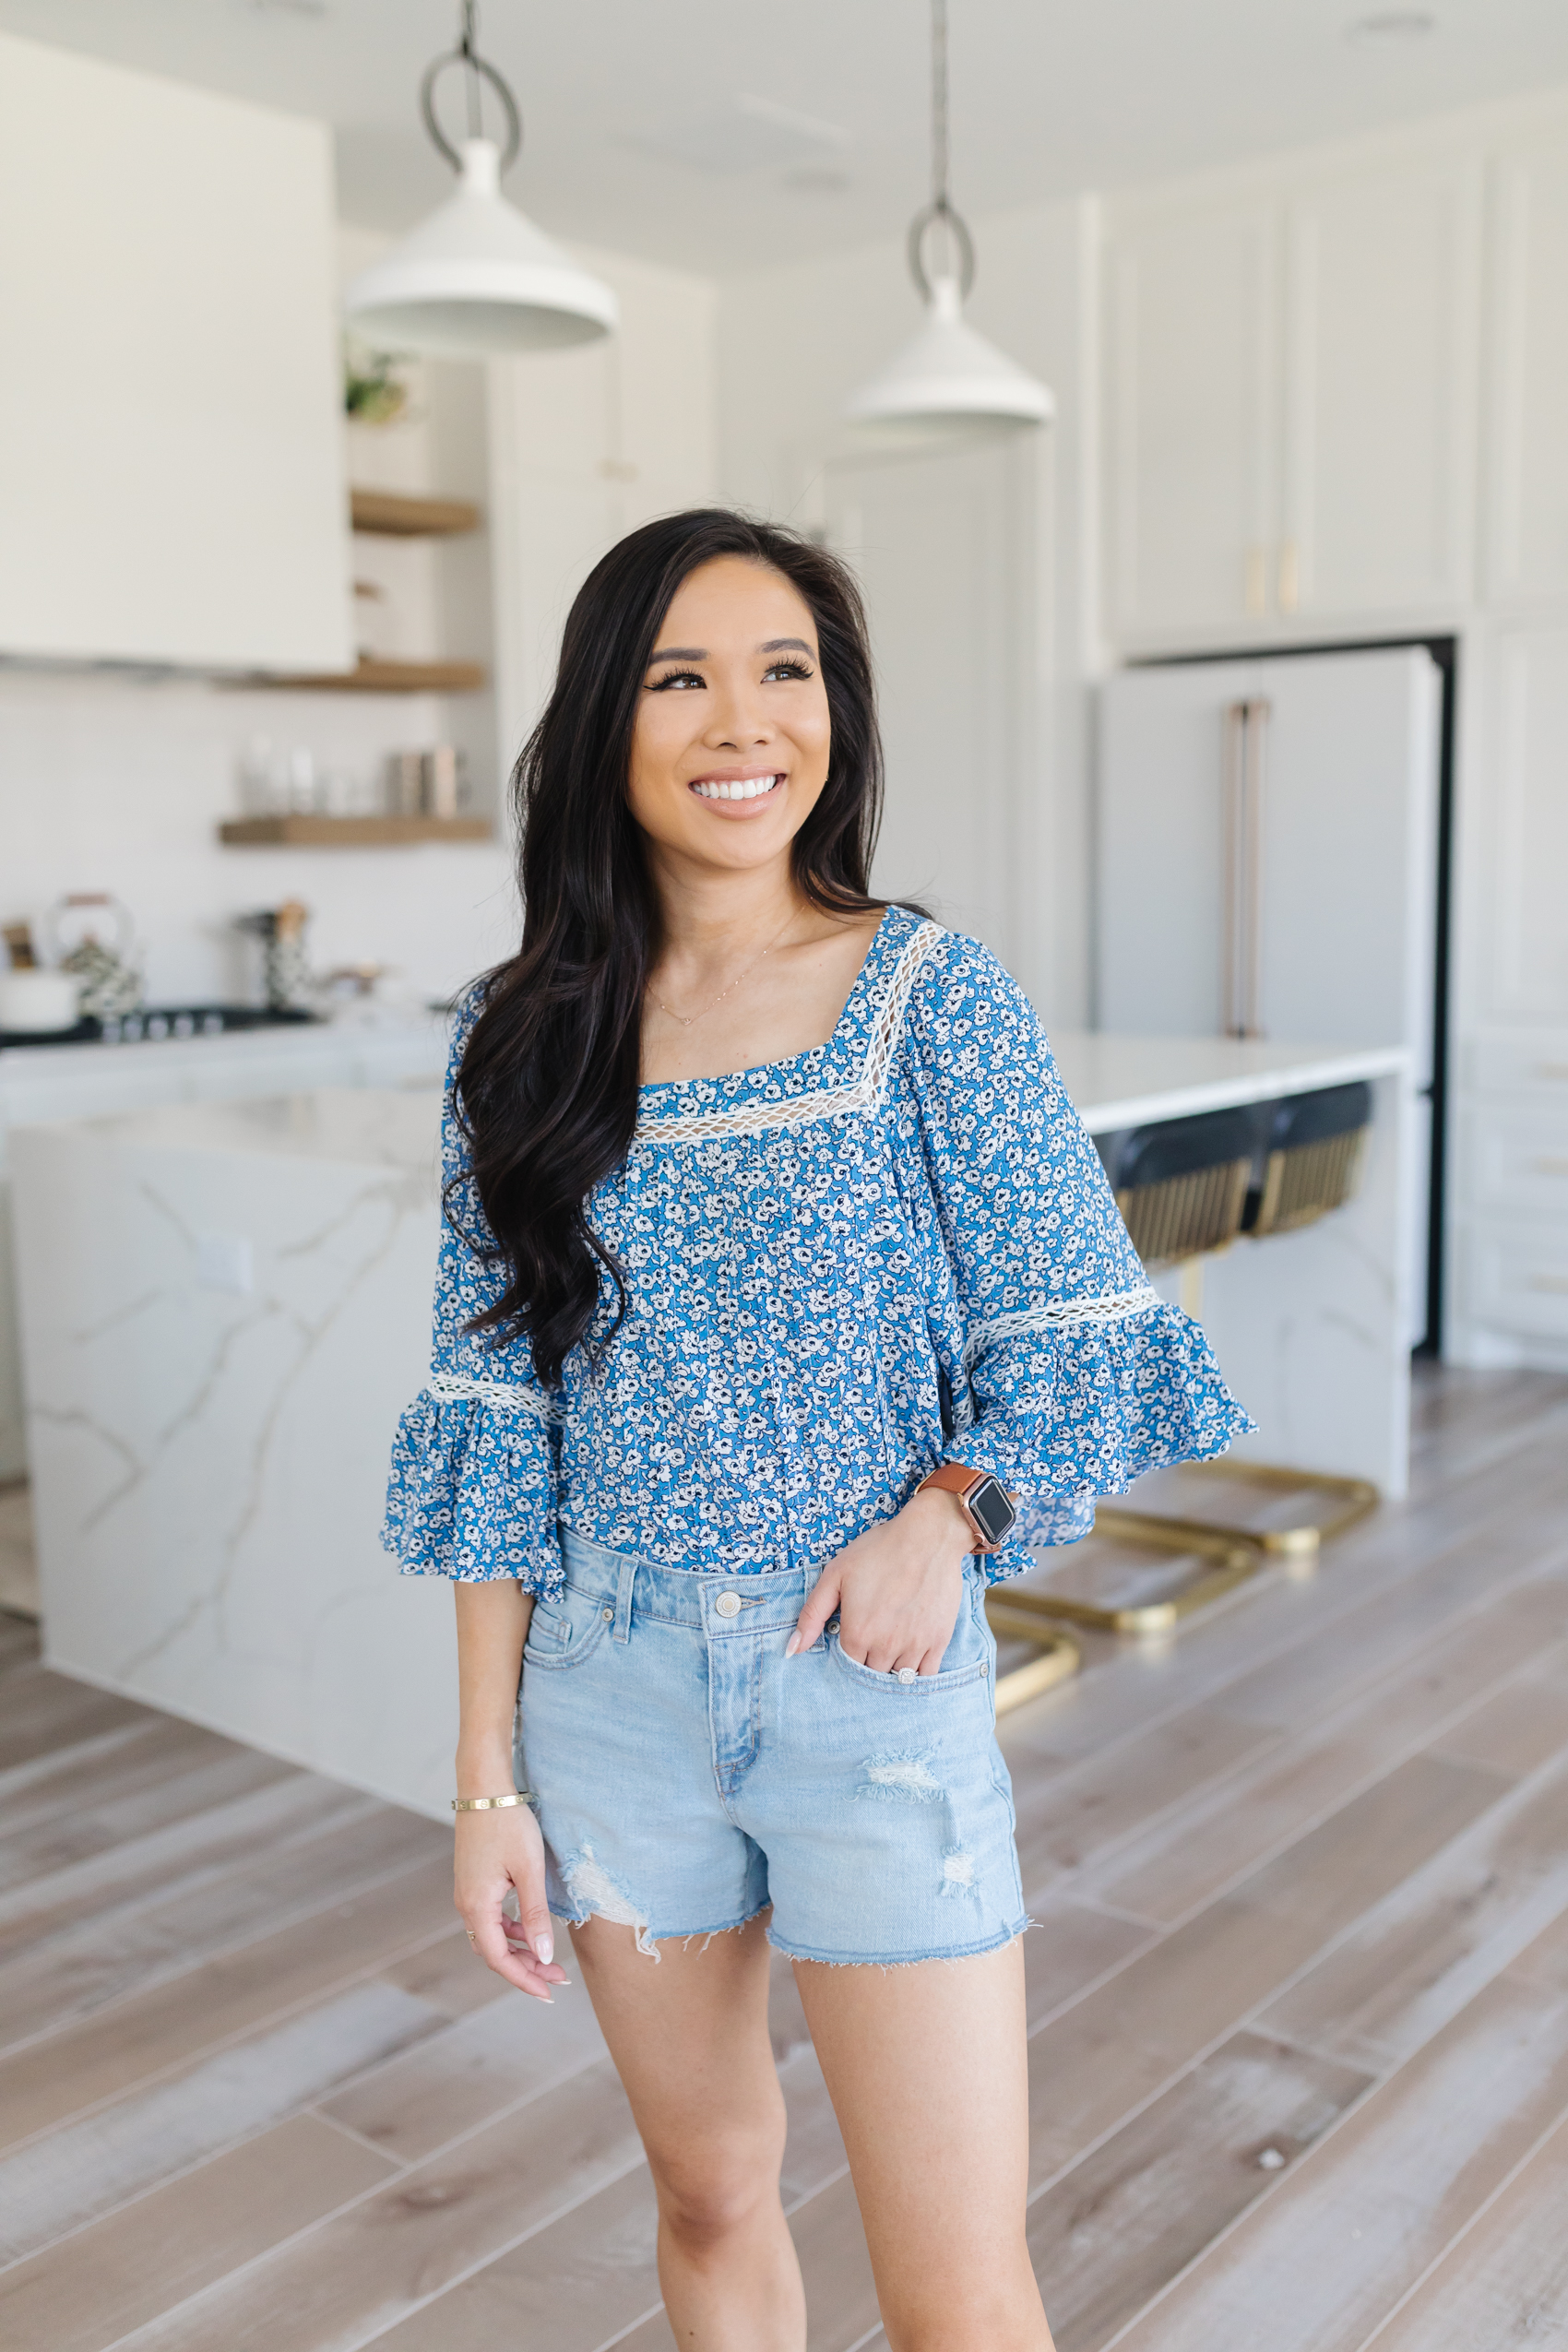 Blogger Hoang-Kim styles a floral long sleeve top with distressed shorts for a summer outfit from Walmart